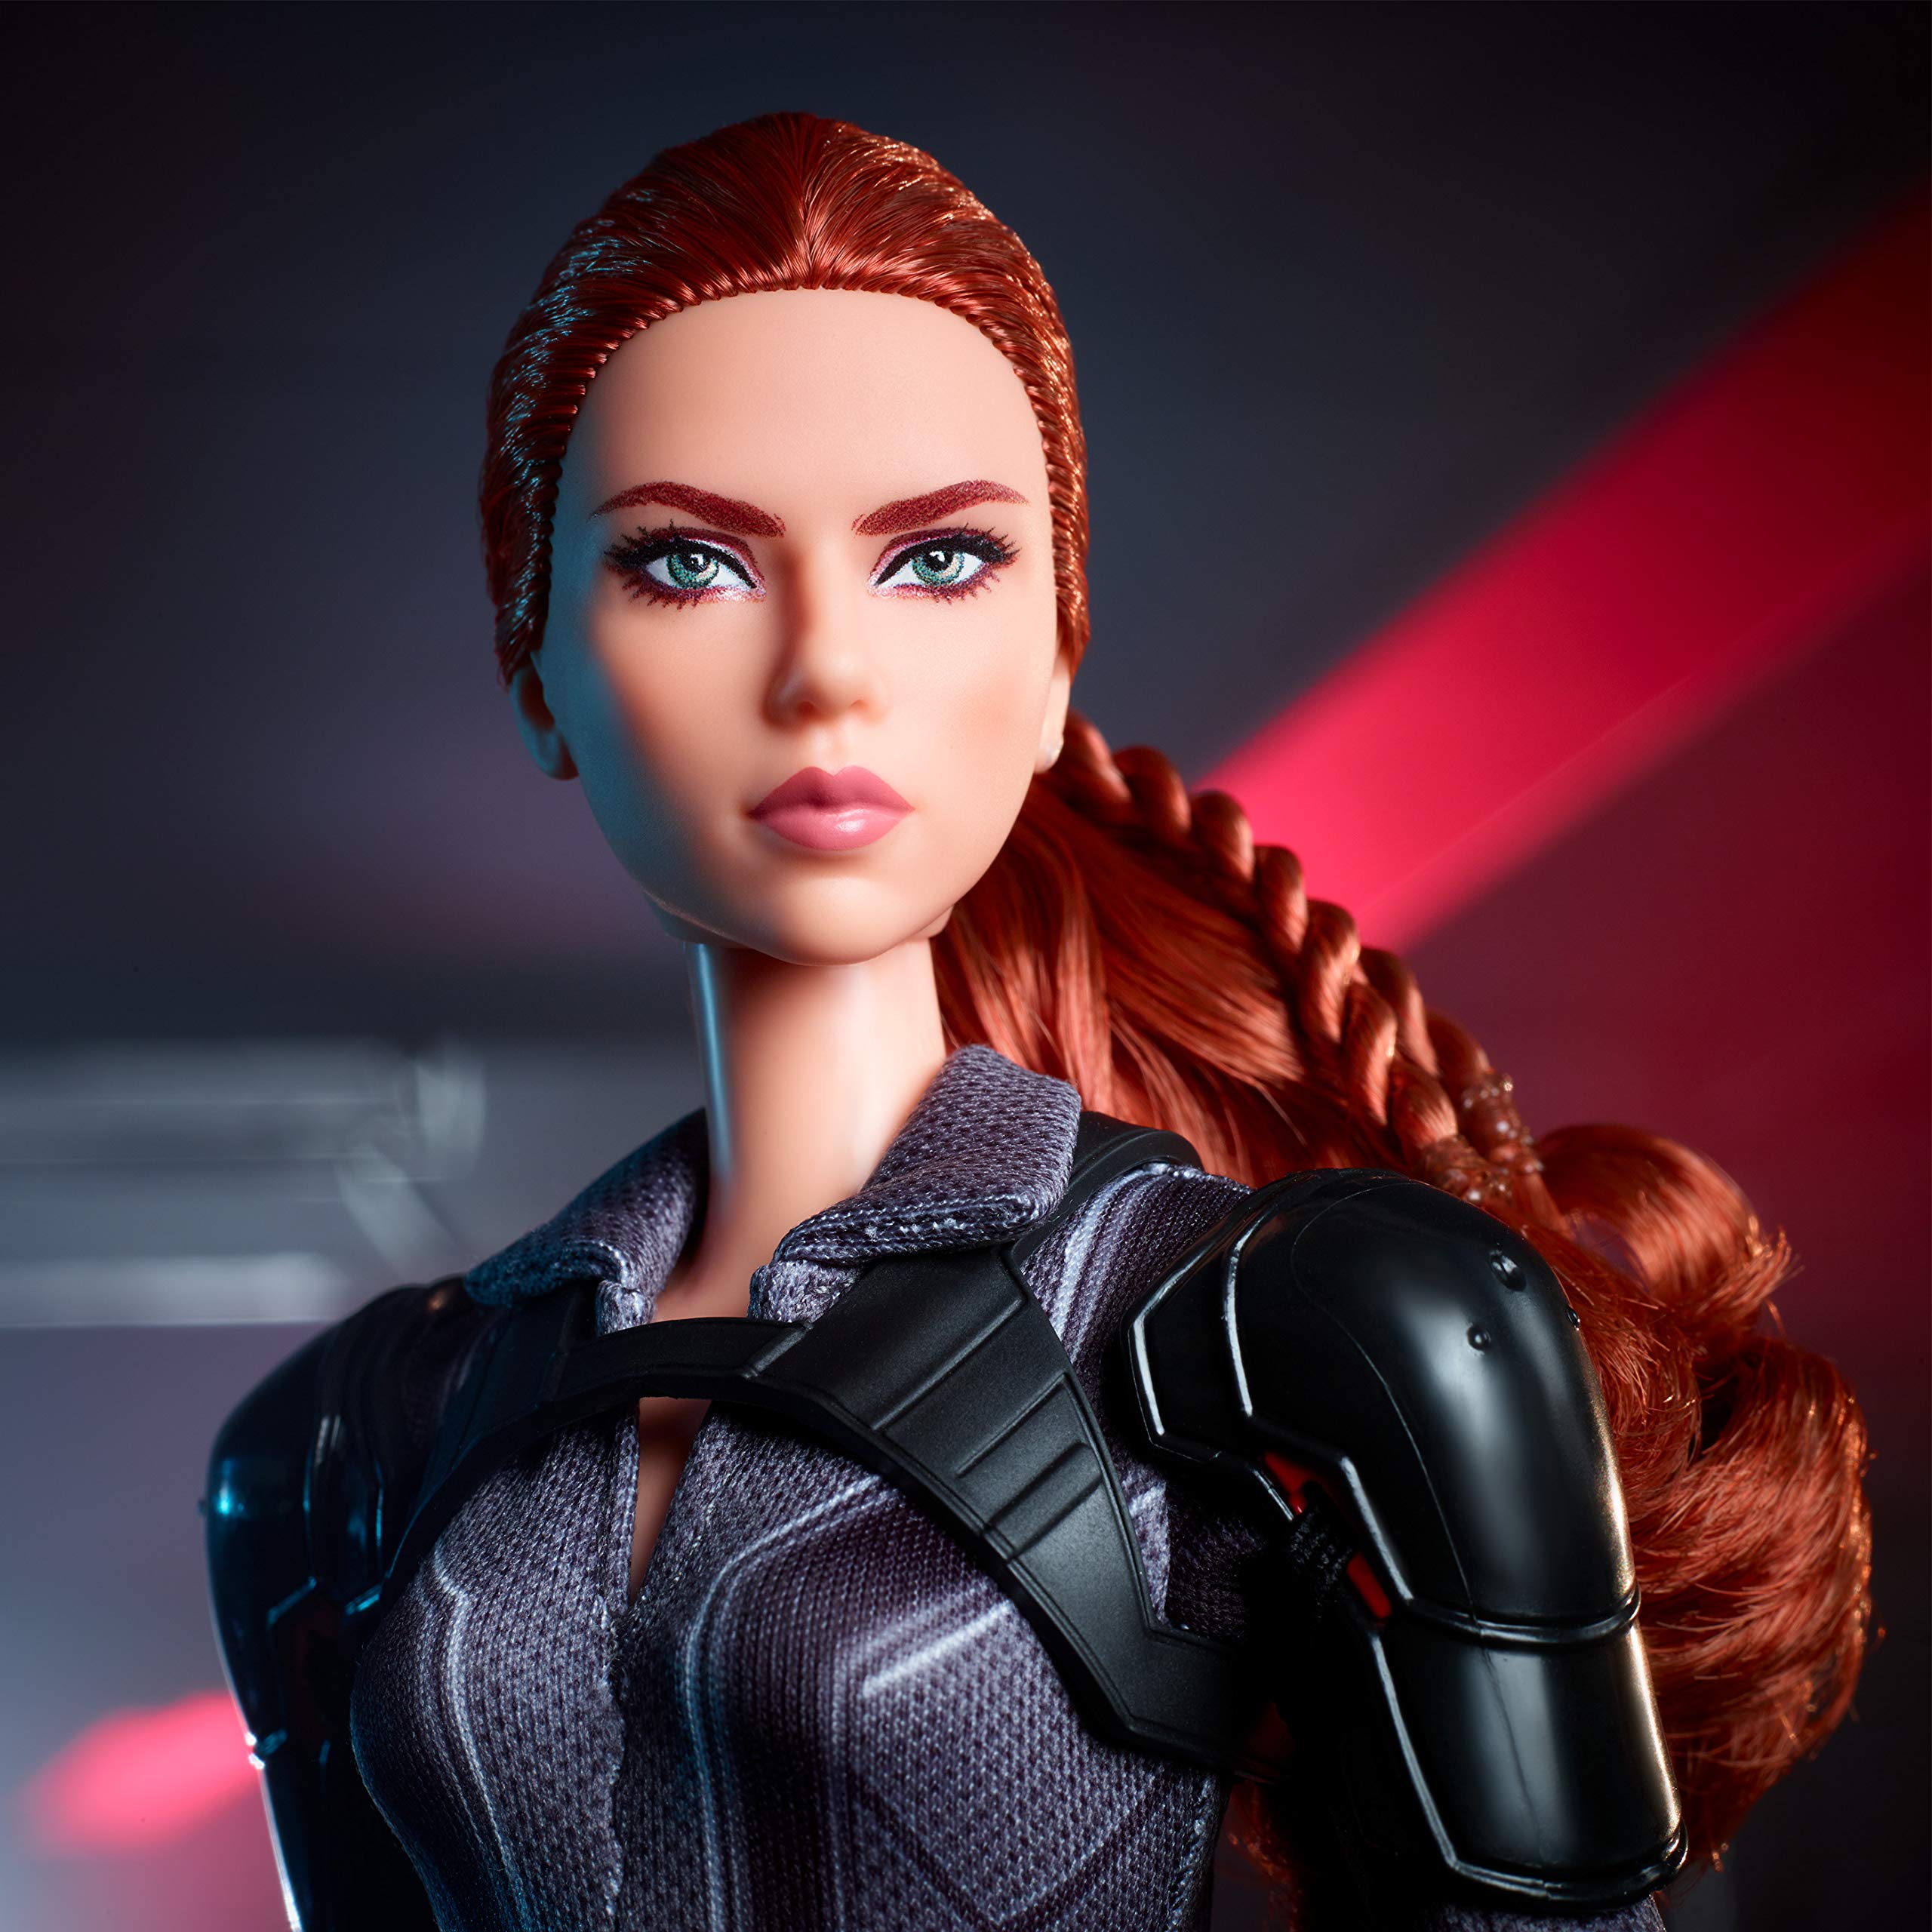 Barbie Marvel Studios’ Black Widow Doll, 11.5-in, Poseable with Red Hair, Wearing Armored Bodysuit and Boots, Gift for Collectors [Amazon Exclusive]